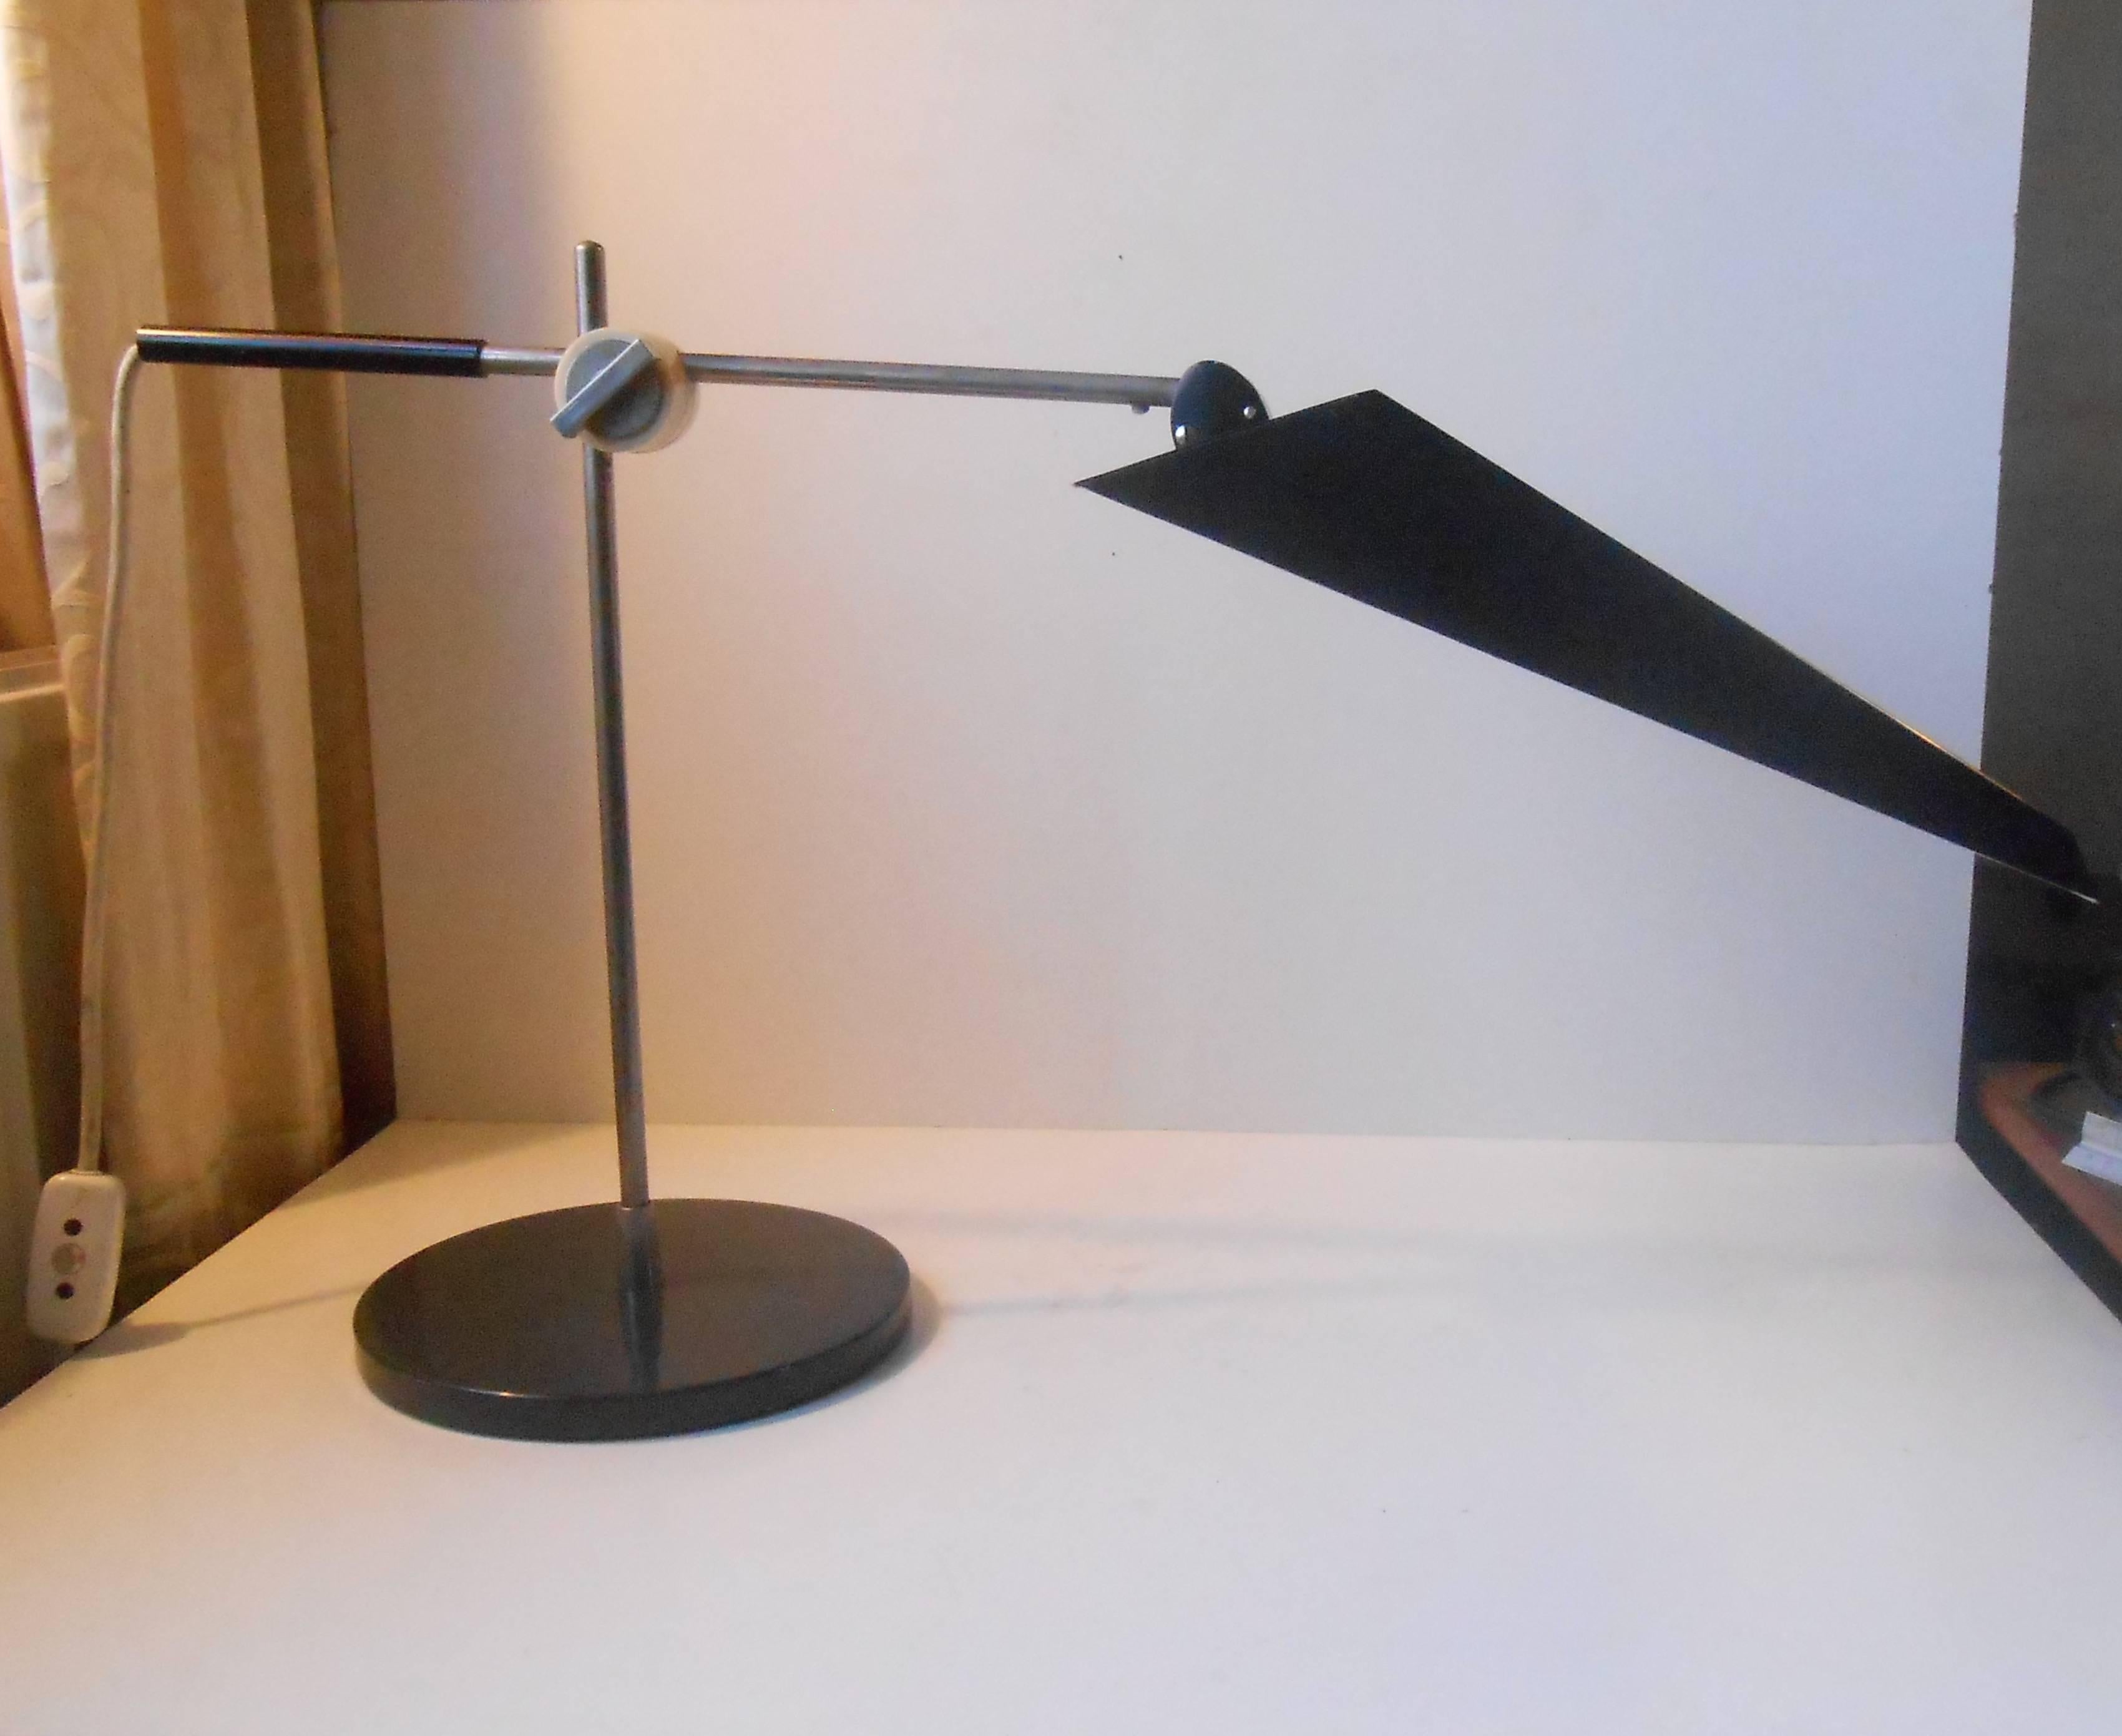 Large shaded fully adjustable desk lamp designed by Christian Dell in the late 1940s. Two light-bulbs each up to 40 watts secures a optimal work light. Height adjustable up approx. 75 cm (30 inches). Shade measurements: 12.5' x 6 inches. Marked to